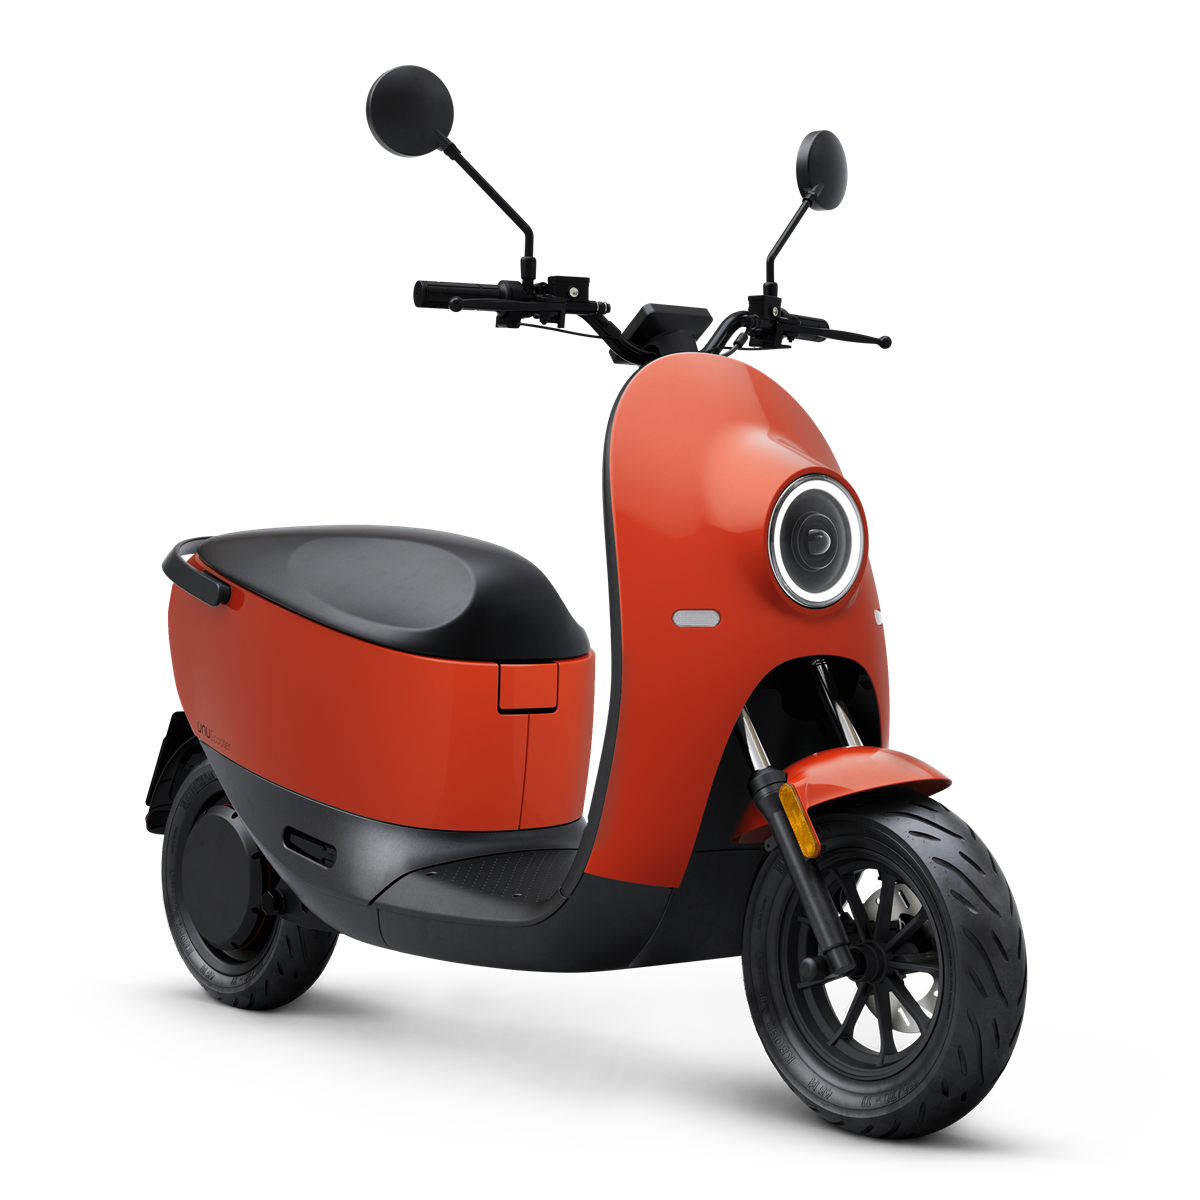 unu Scooter_Red Glossy_ab EUR 2.799